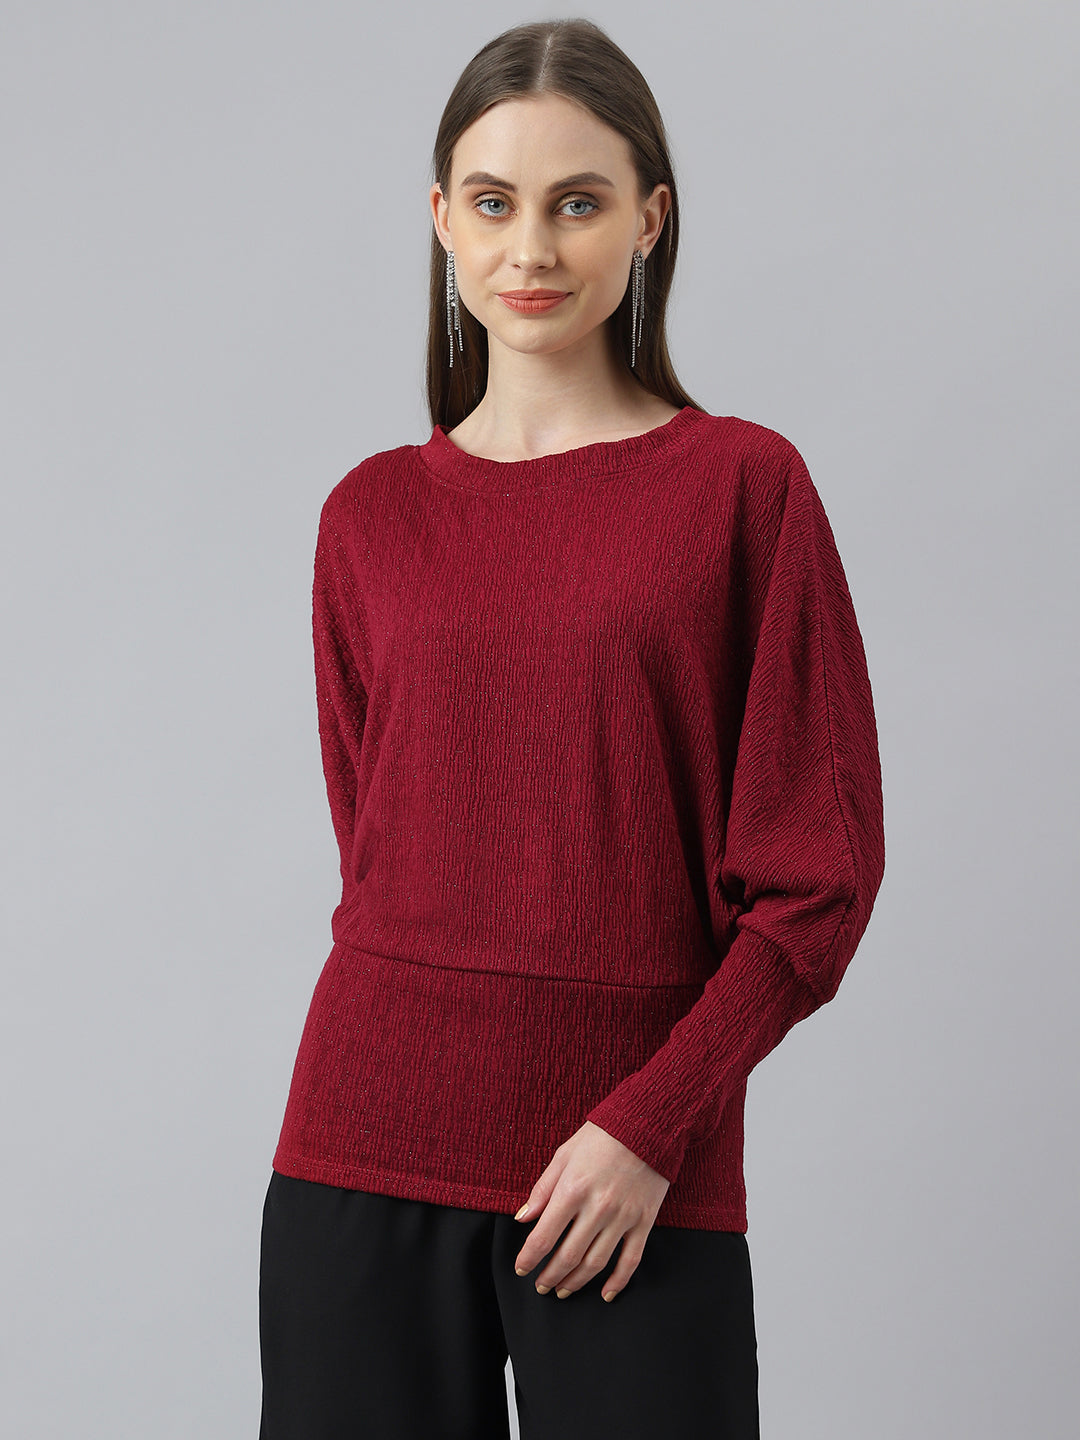 Maroon Full Sleeve Round Neck Women Knit Top for Casual